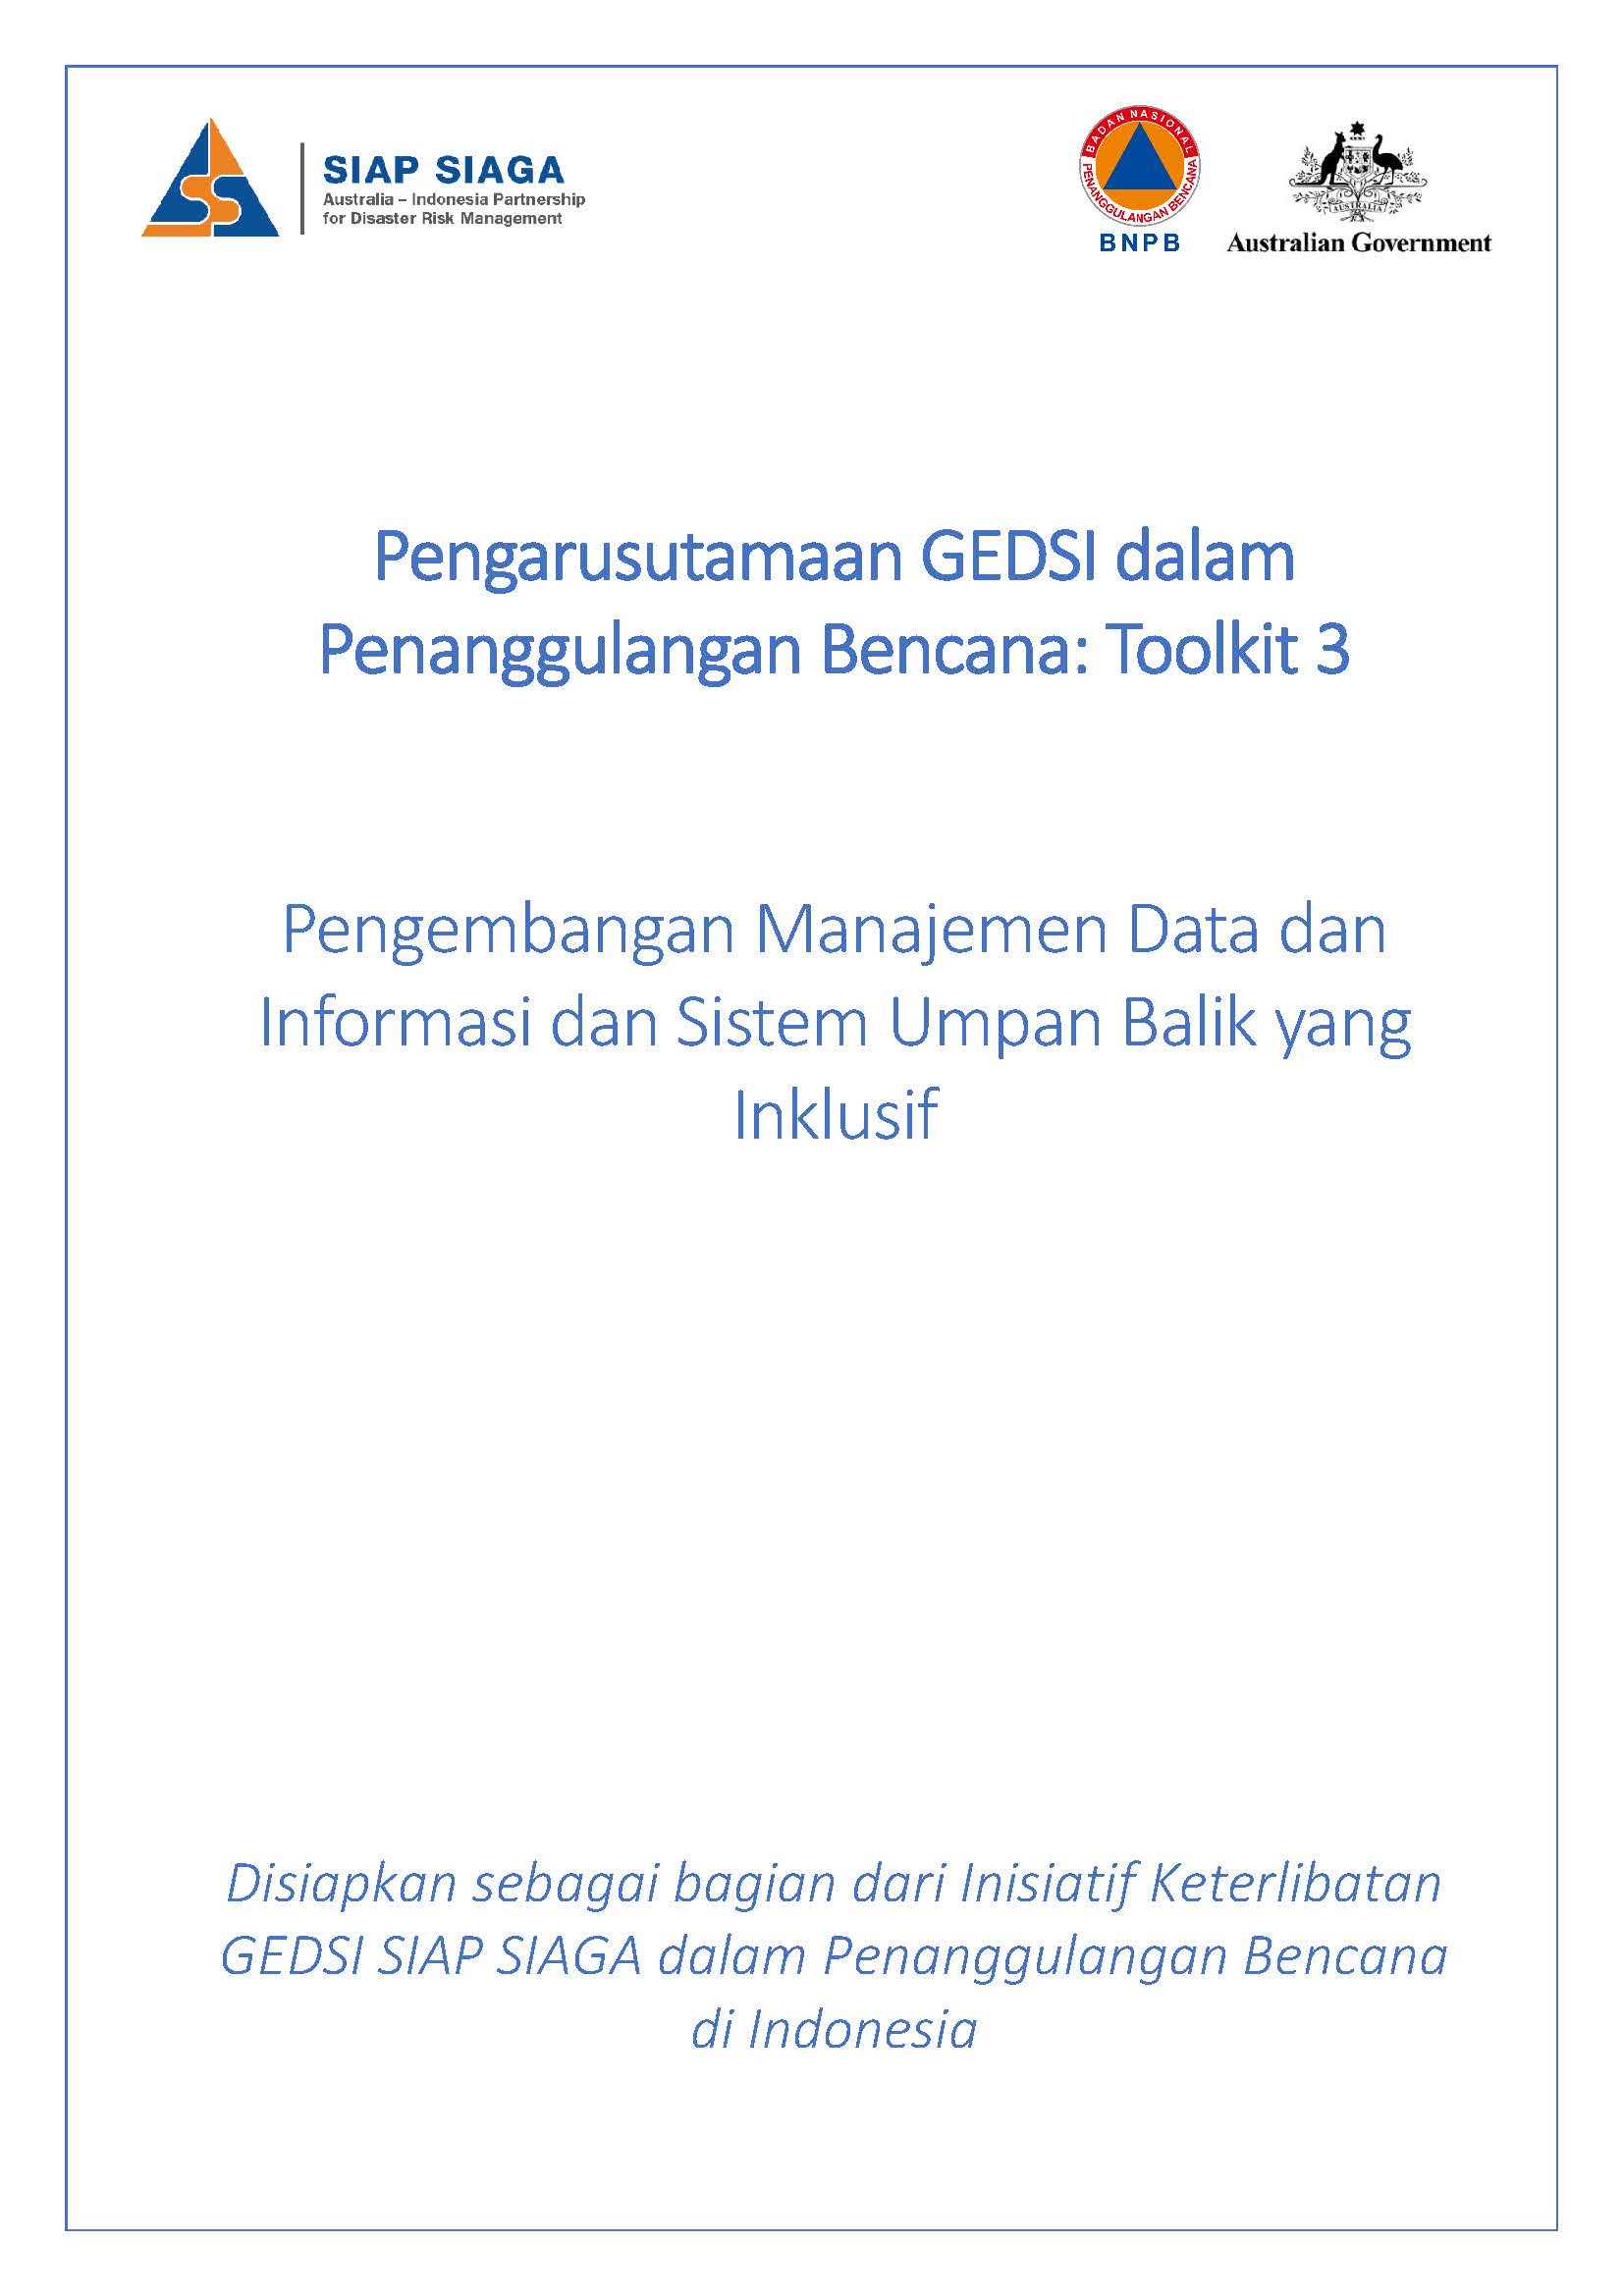 GEDSI Mainstreaming in Disaster Management: Toolkit 03